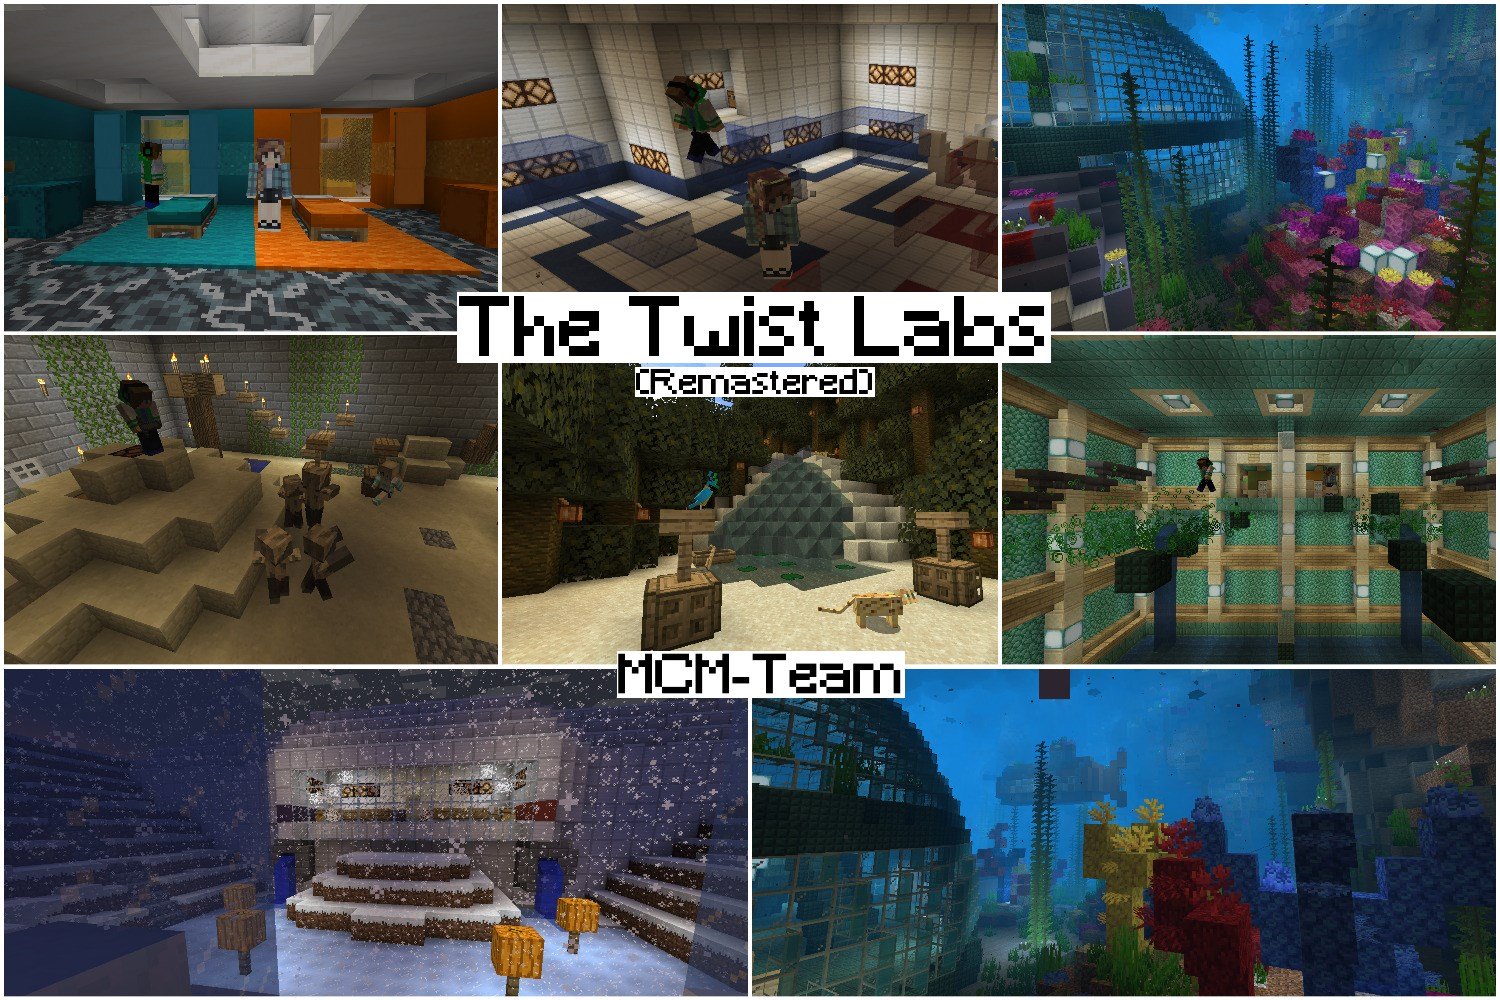 Télécharger The Twist Labs (Remastered) pour Minecraft 1.15.2